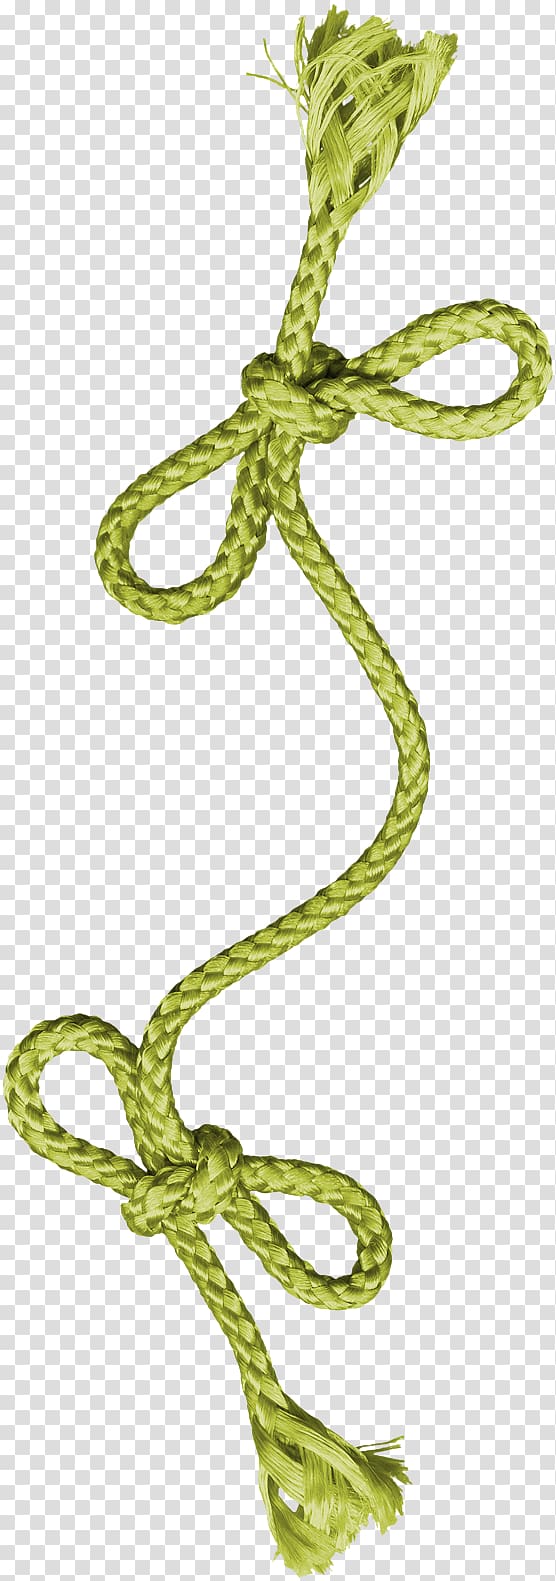 Brown rope , Rope Hemp, Floating rope transparent background PNG clipart